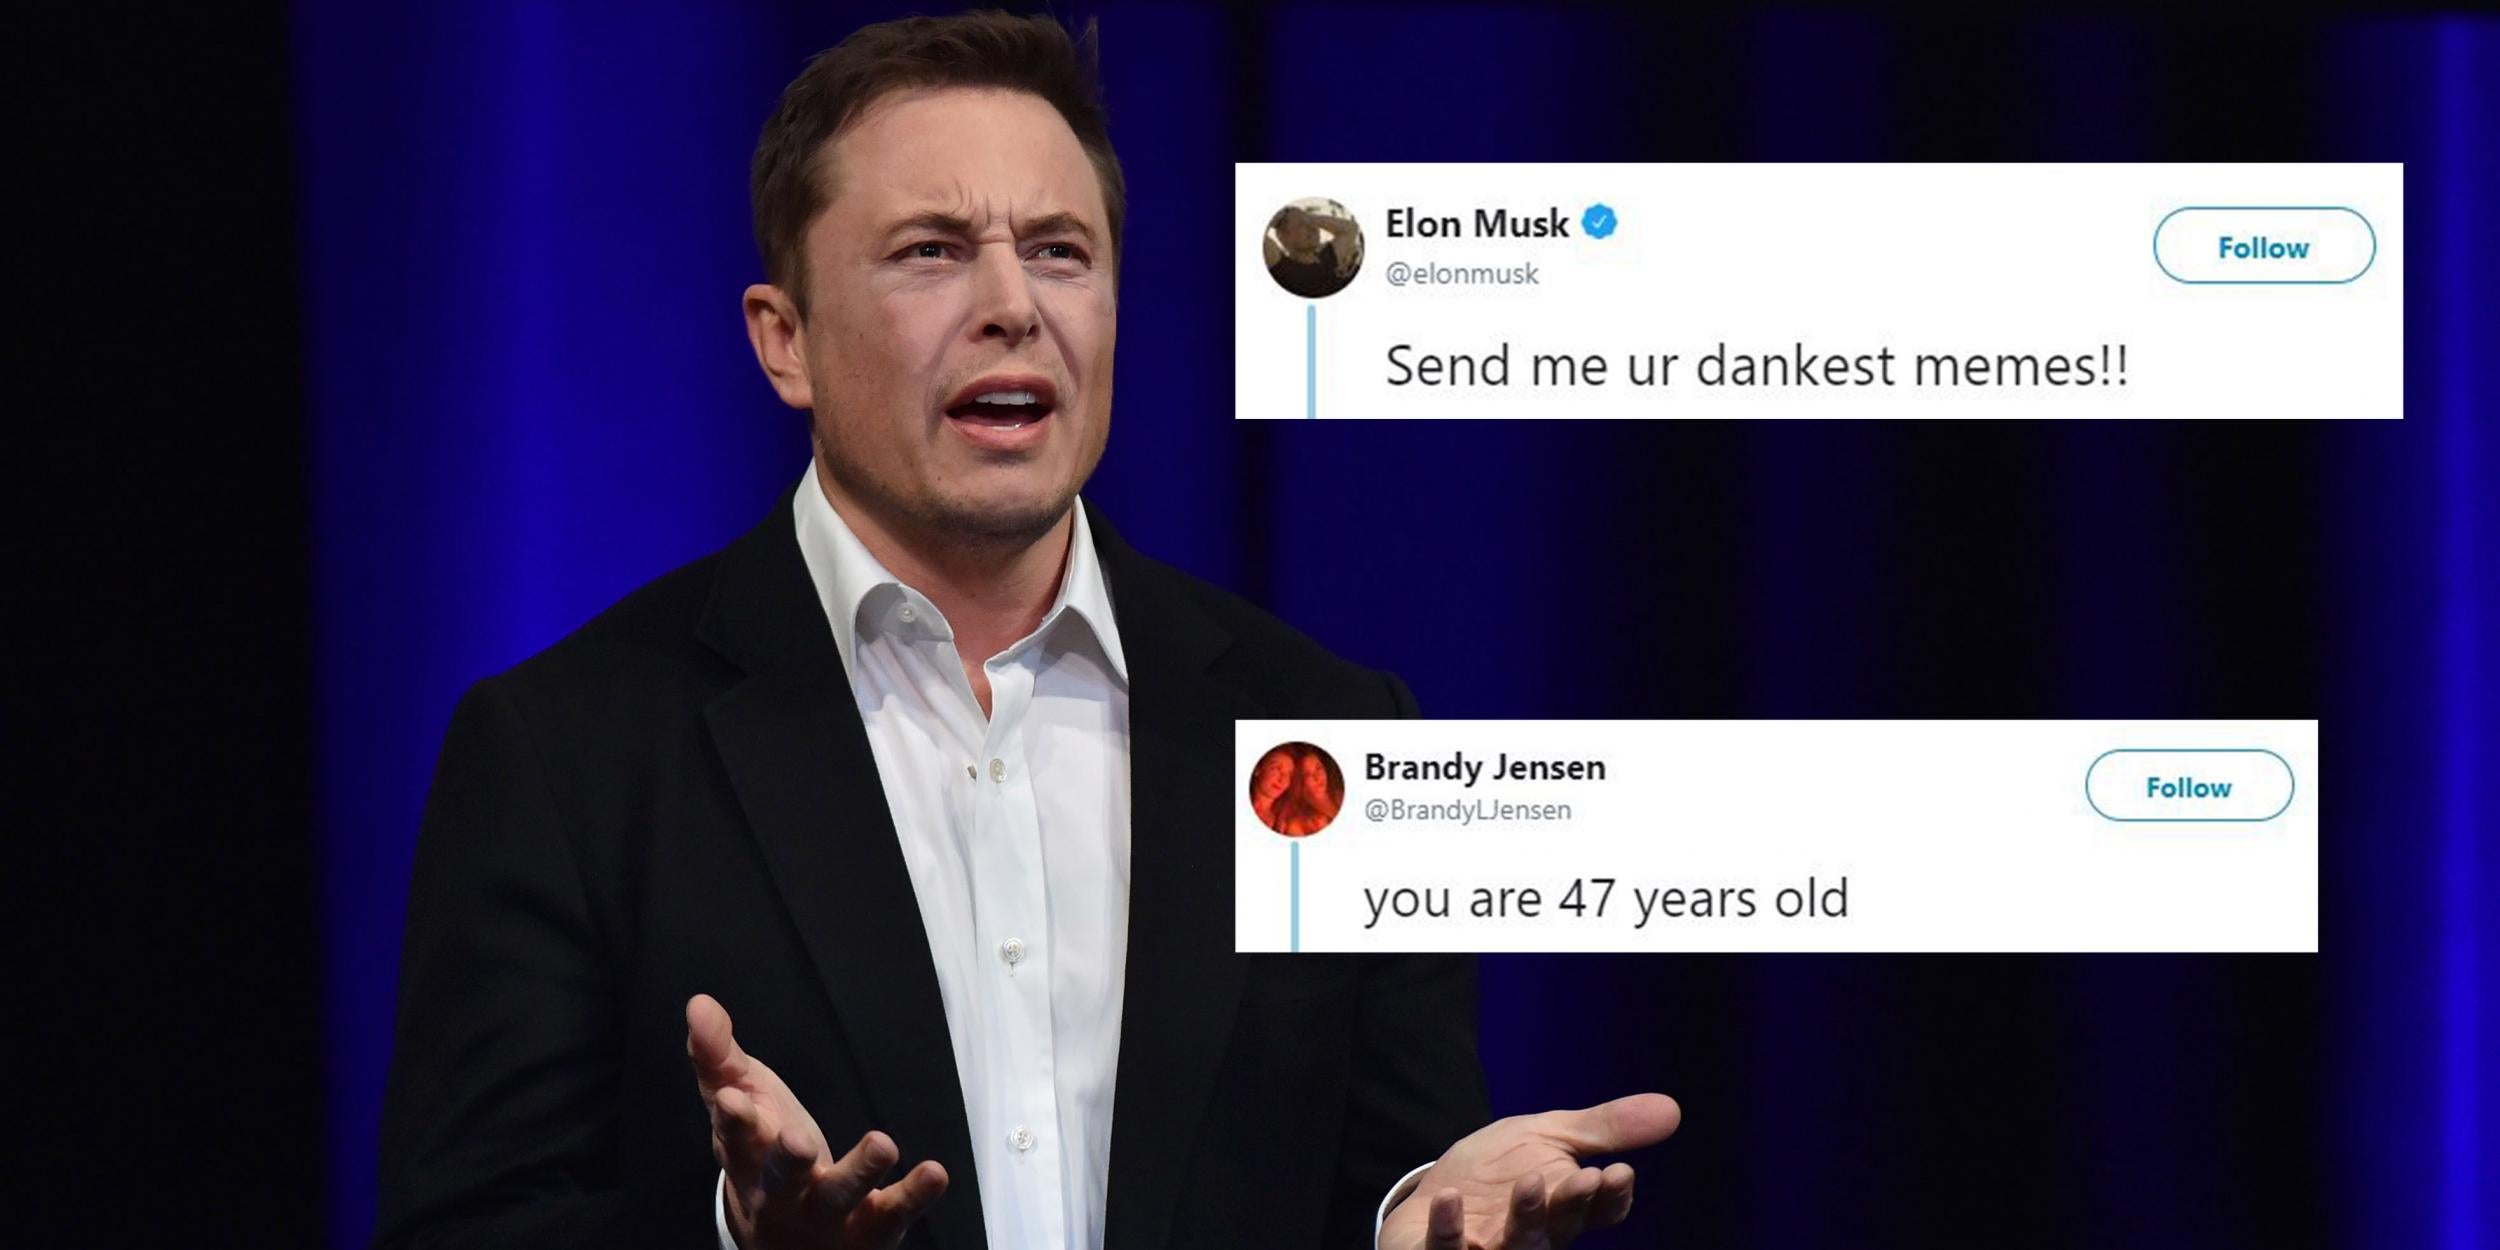 Elon Musk Asked Twitter To Send Him Their Dankest Memes And It Free